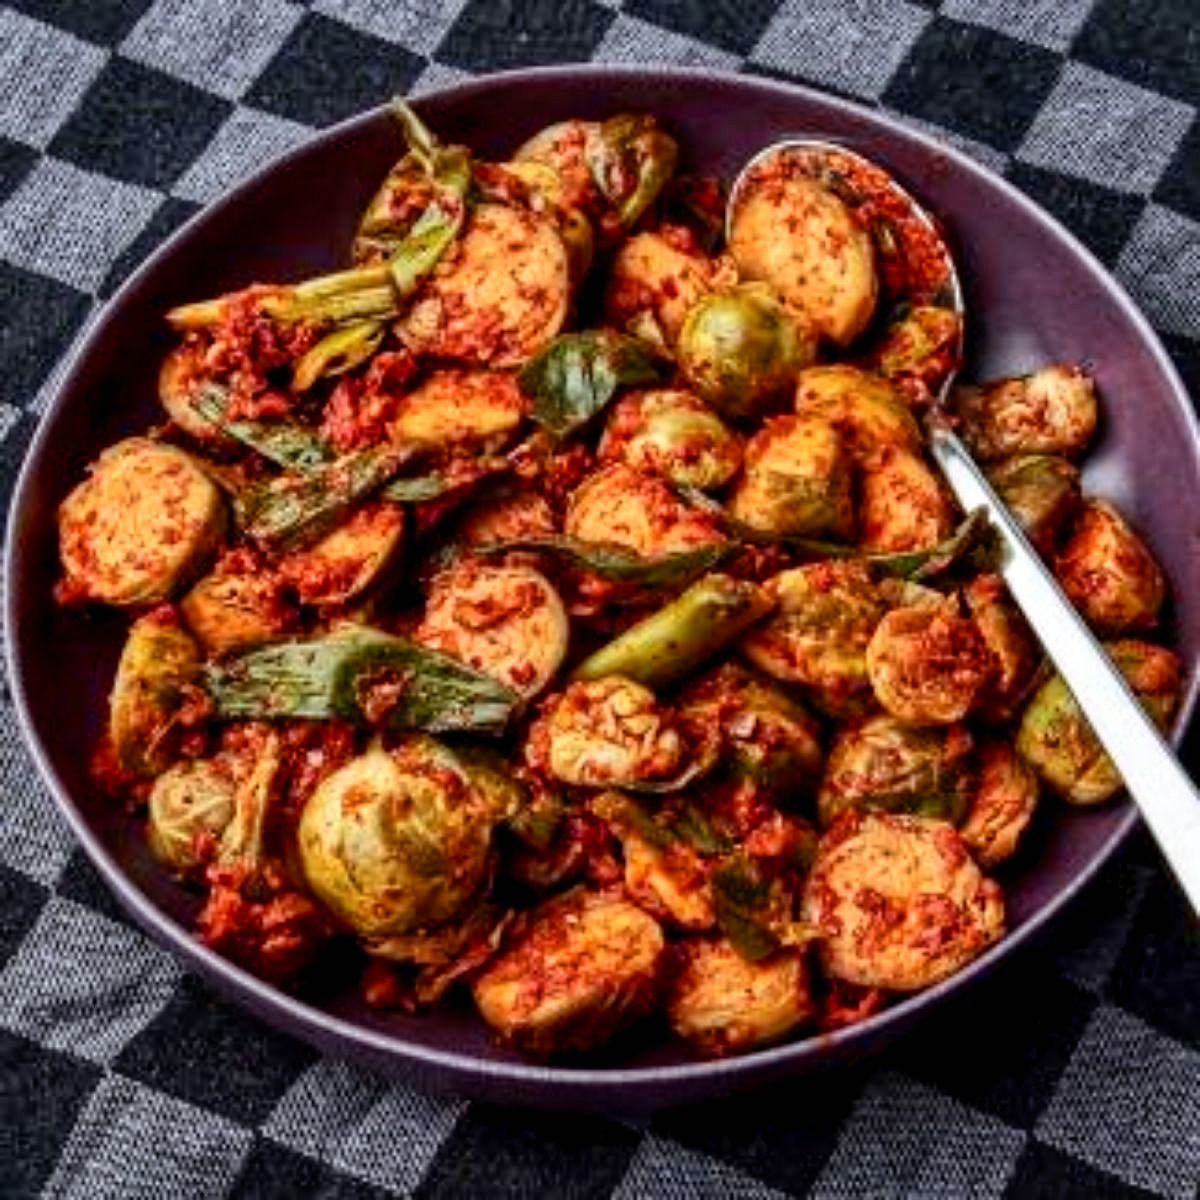 2. Brussels Sprouts Kimchi - holiday brussel sprout recipes